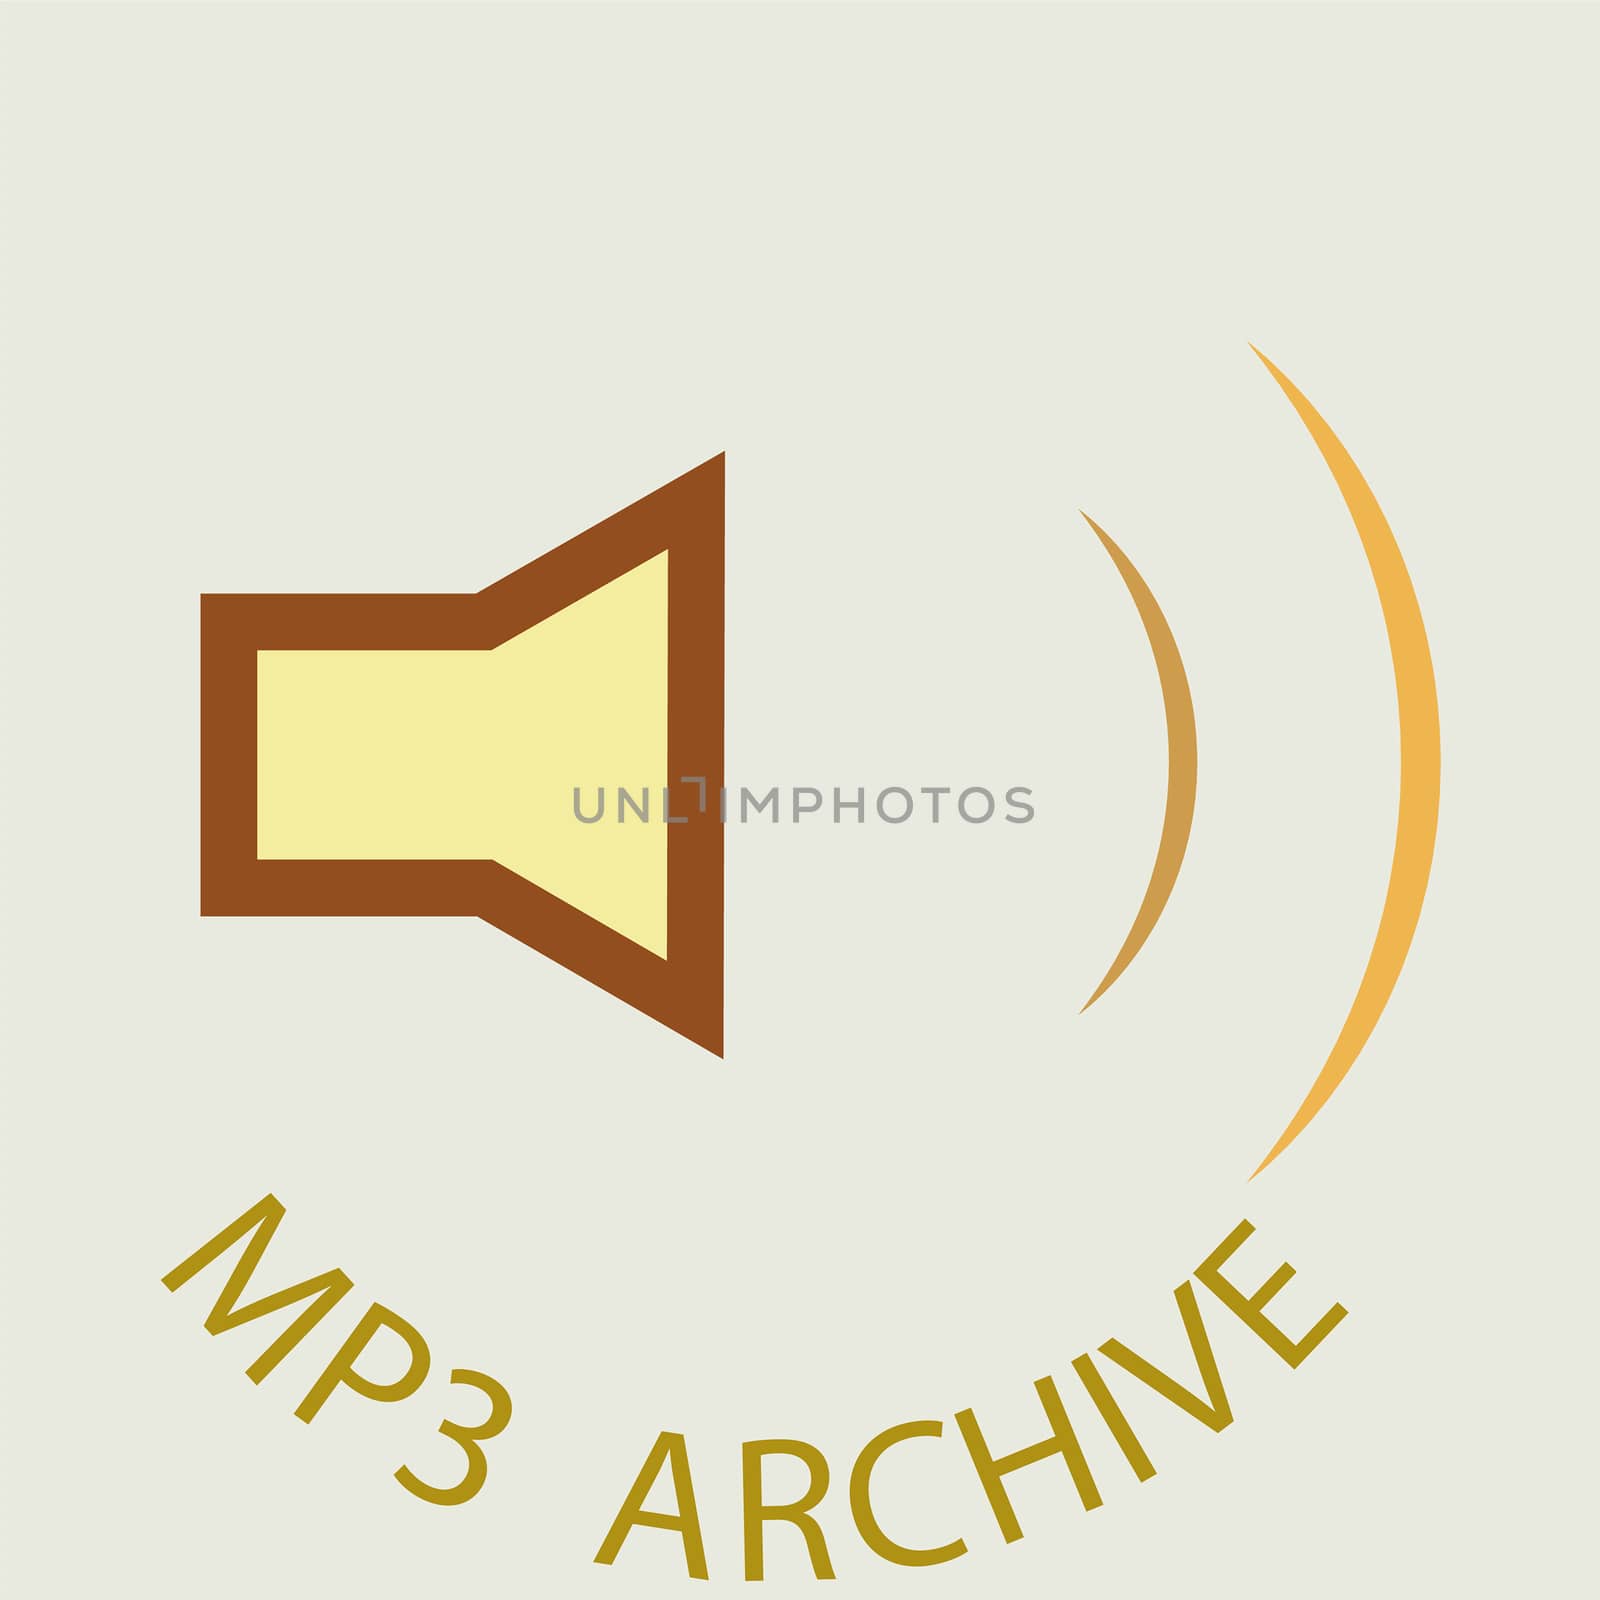 MP3 Archive button for Web collection on light brown background